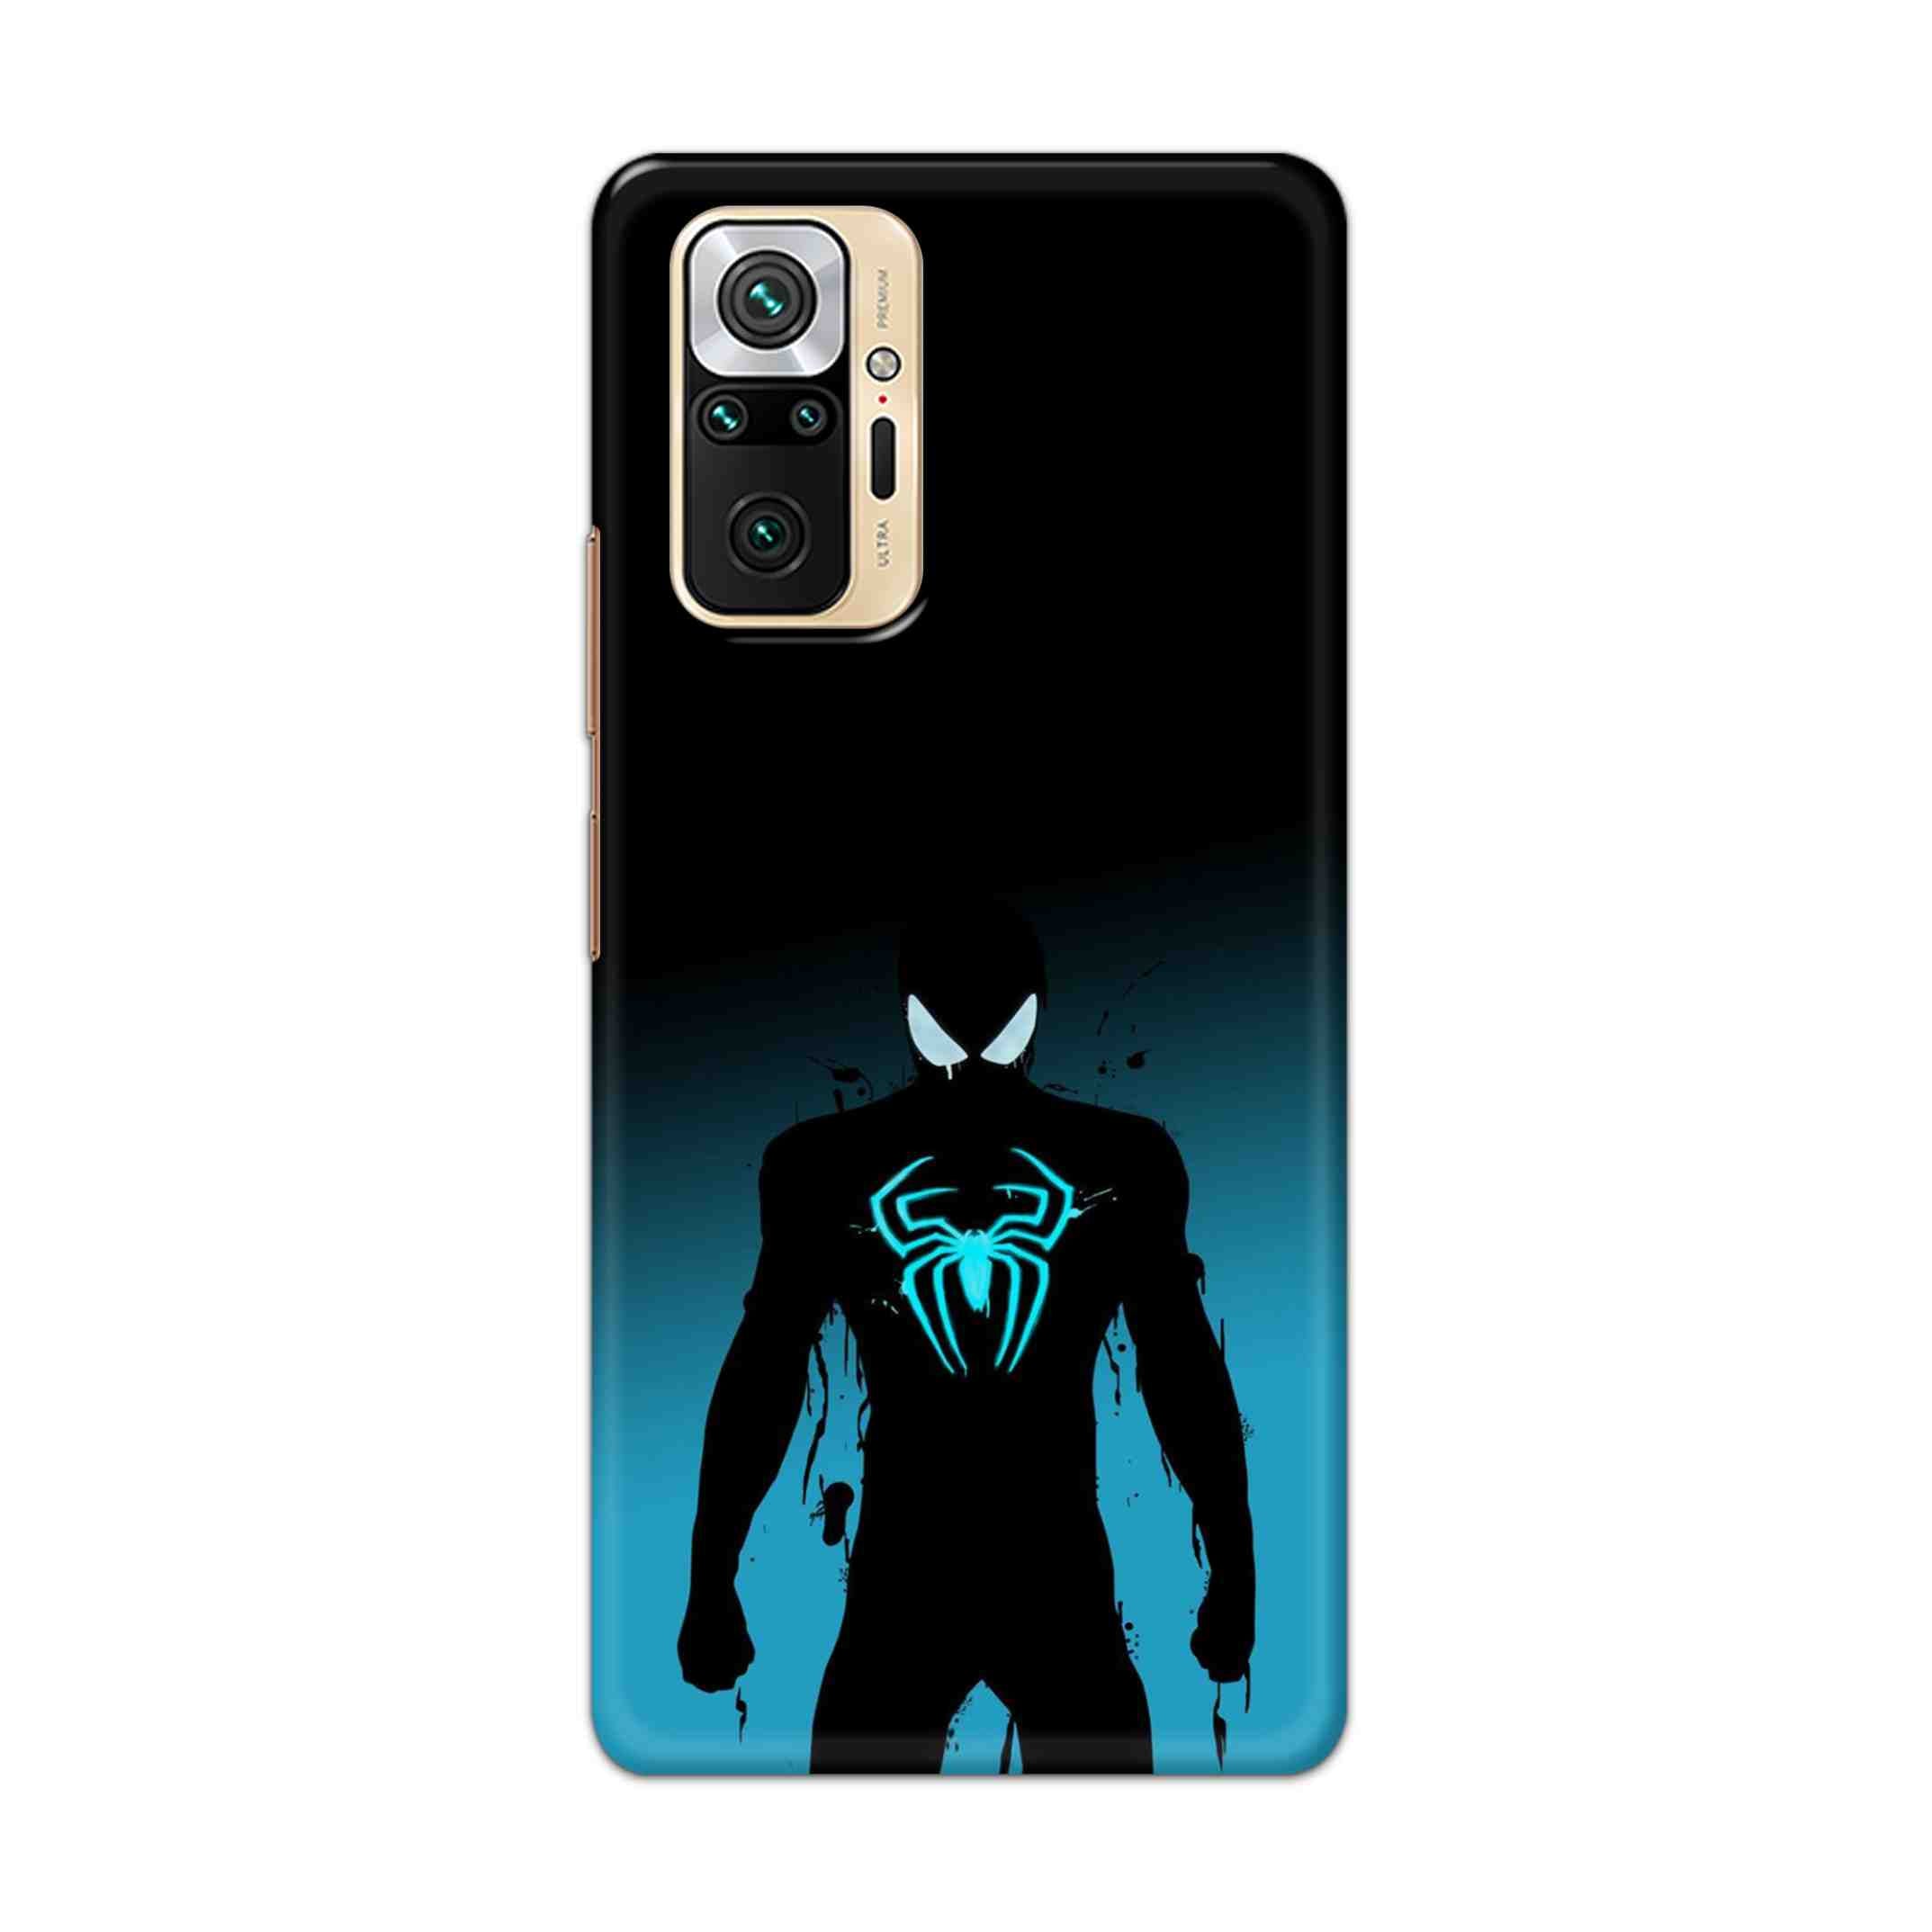 Buy Neon Spiderman Hard Back Mobile Phone Case Cover For Redmi Note 10 Pro Online